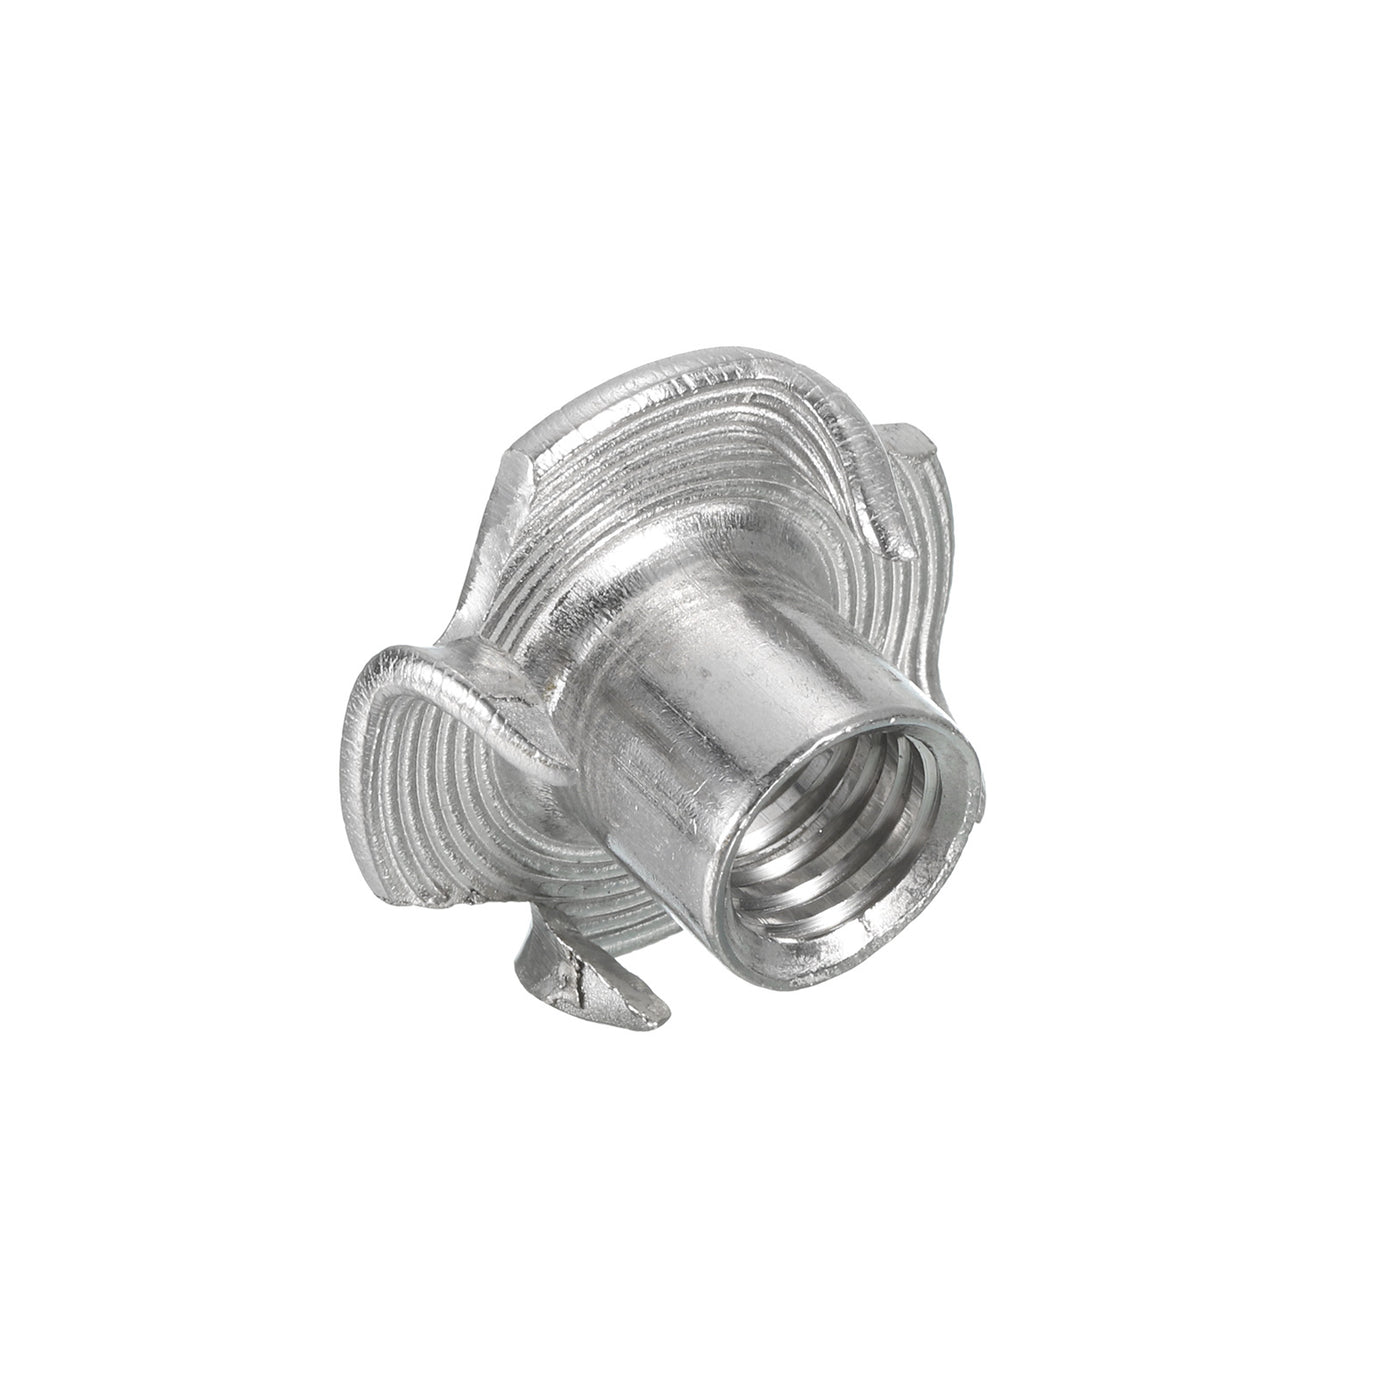 uxcell Uxcell 3/8"-16 T-nut 100pcs 304 Stainless Steel 4 Pronged Tee Nuts Threaded Insertion